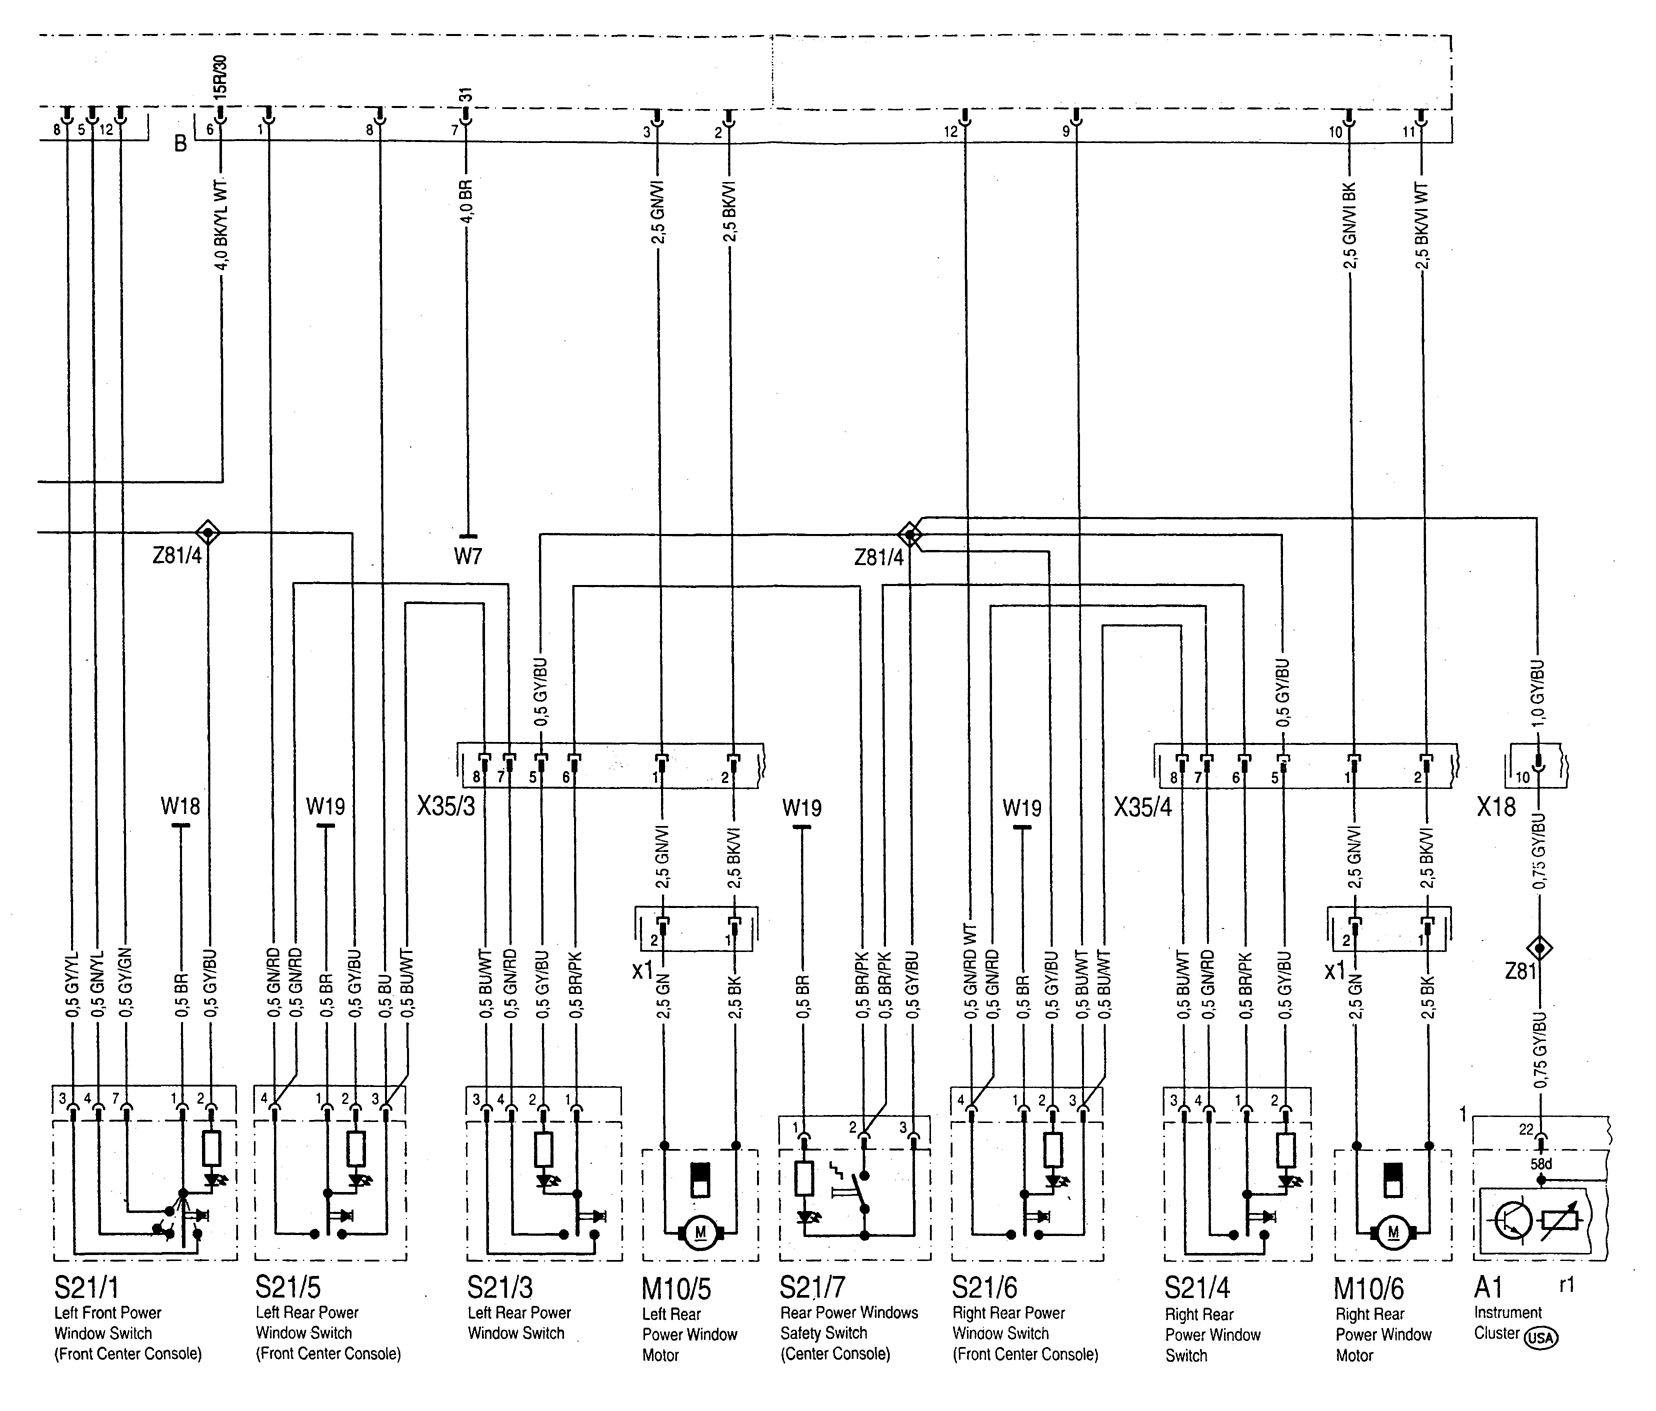 Mercedes Benz Wiring Diagrams from www.carknowledge.info